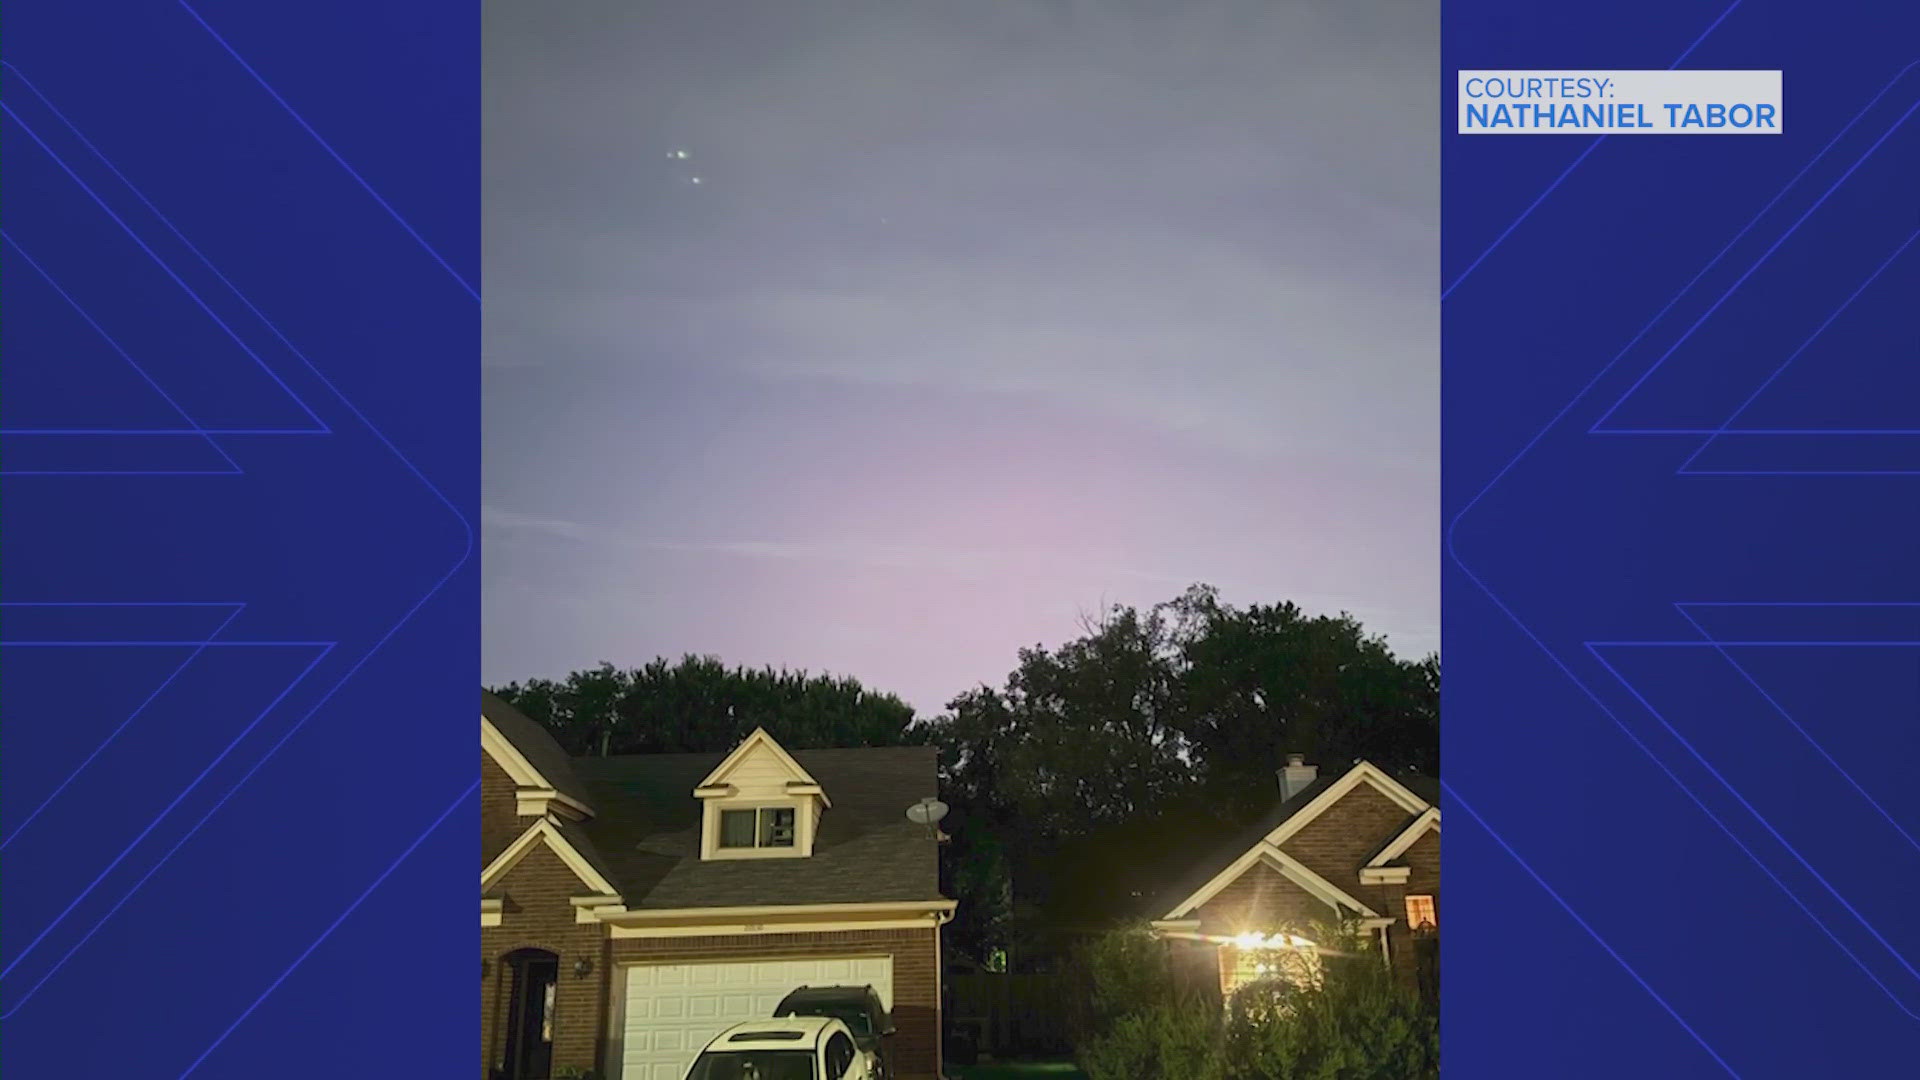 KHOU 11 viewers shared photos of the Aurora Borealis seen in Texas on Friday, May 10.